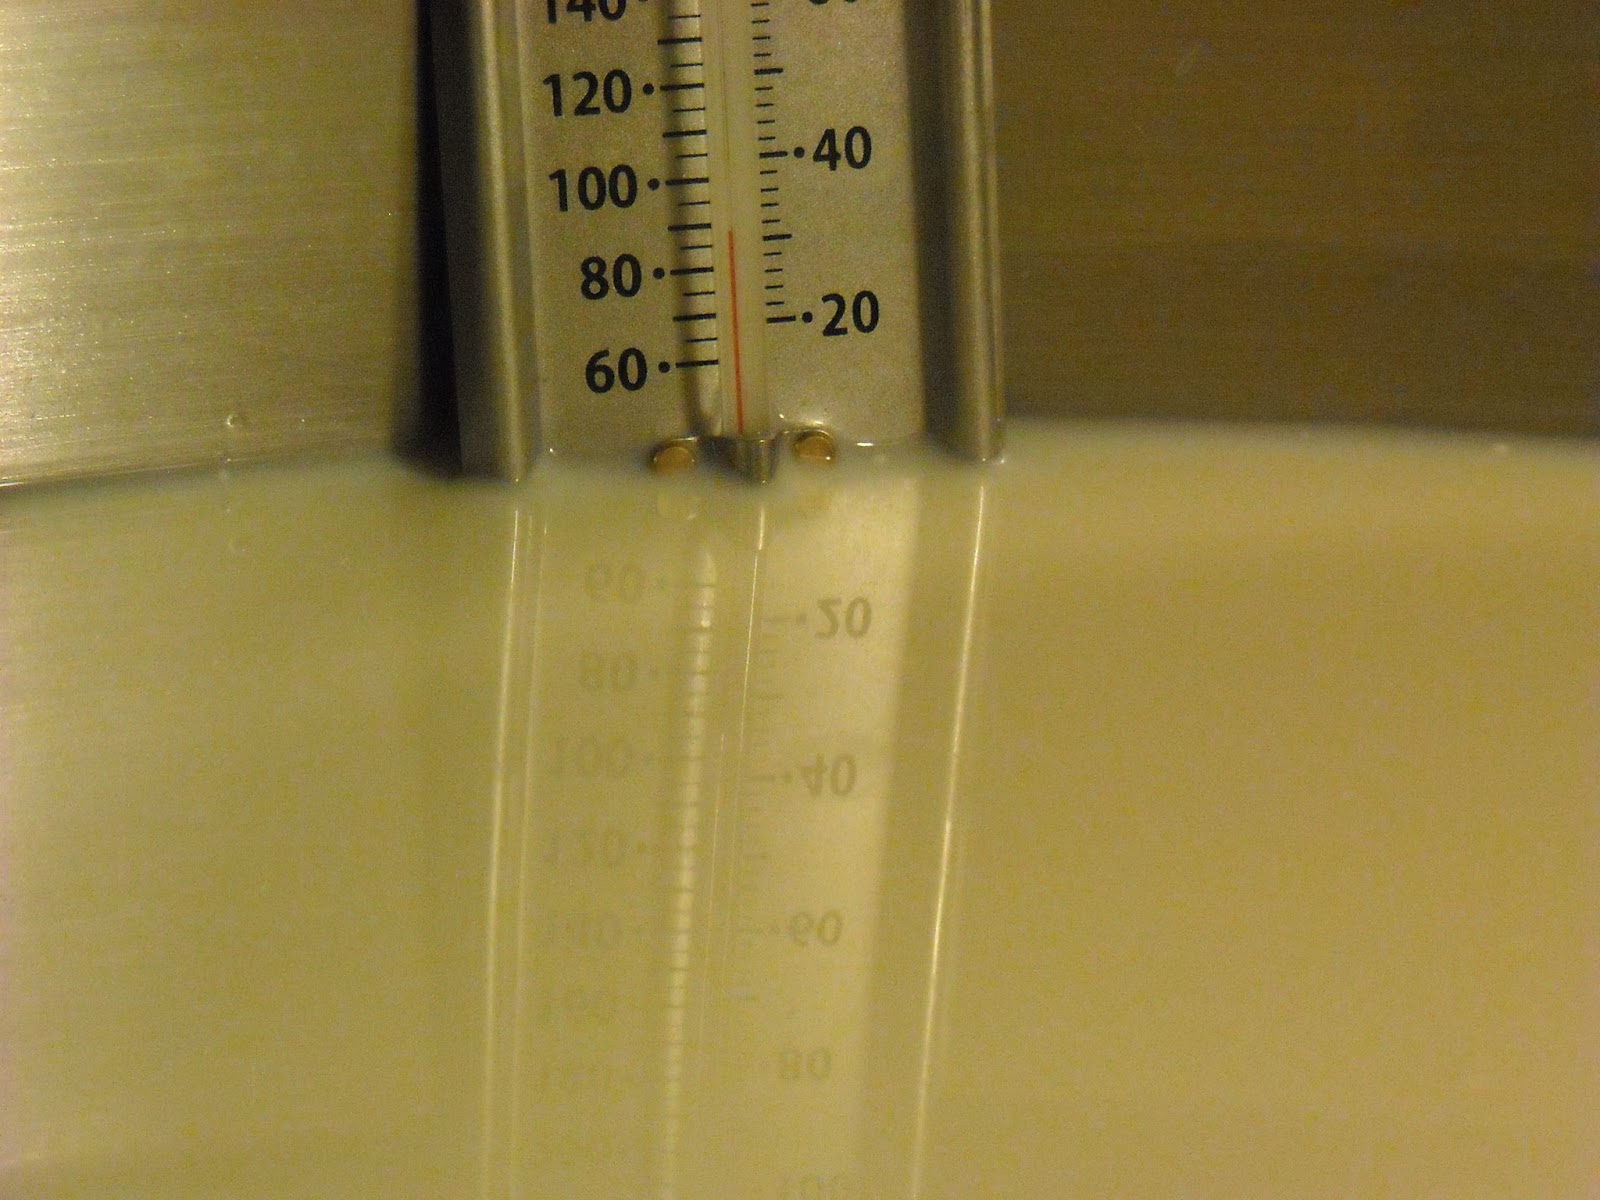 Thermometer for cheese making 0 - 100°C, 8,25 €